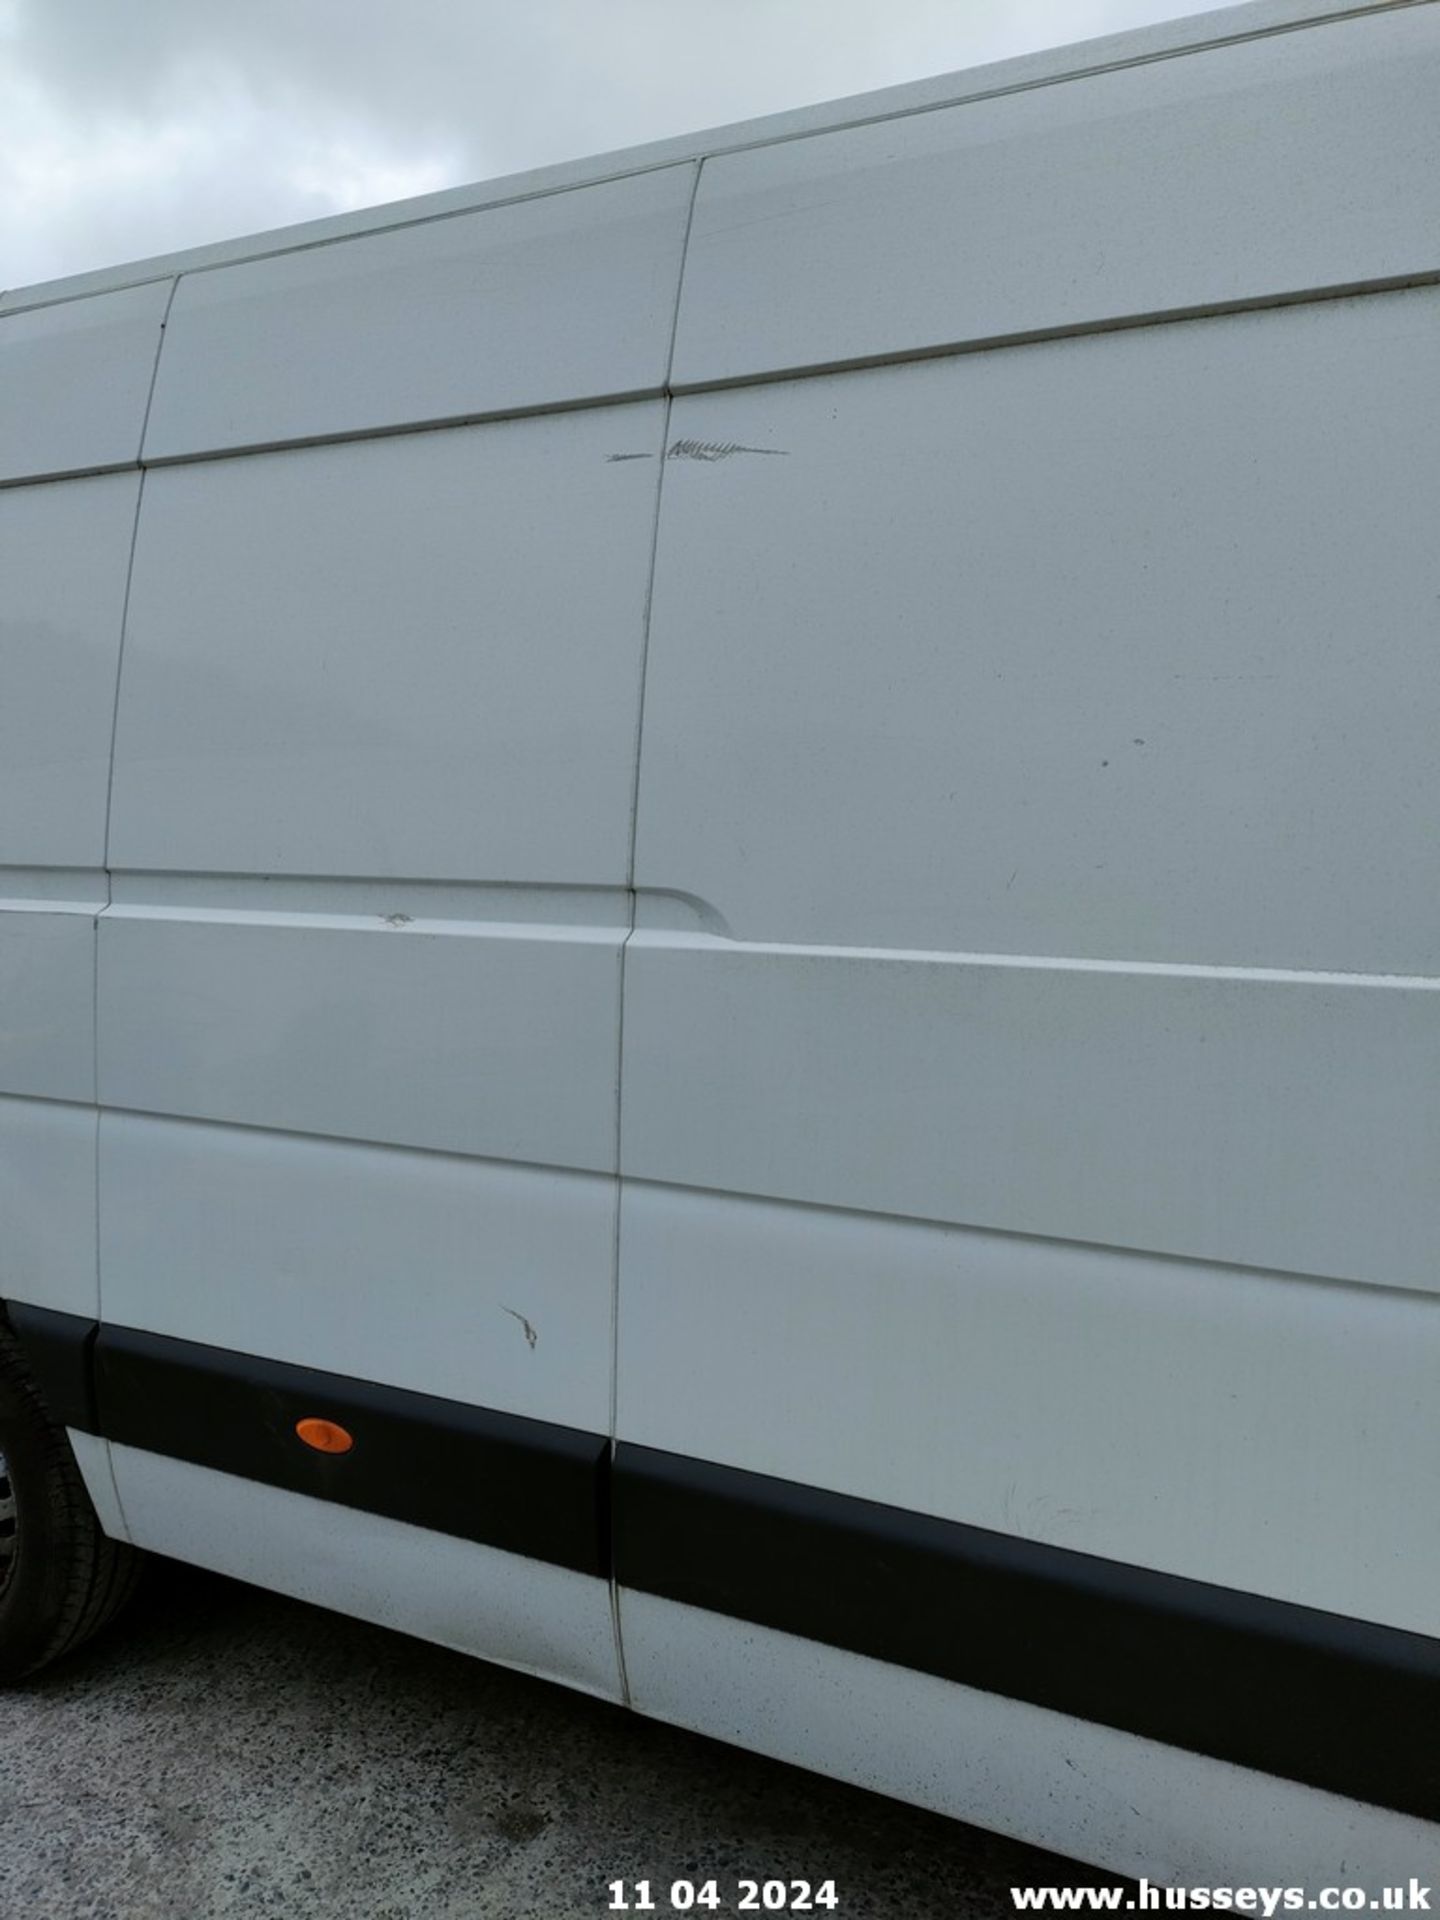 18/68 RENAULT MASTER LM35 BUSINESS DCI - 2298cc 5dr Van (White) - Image 51 of 68